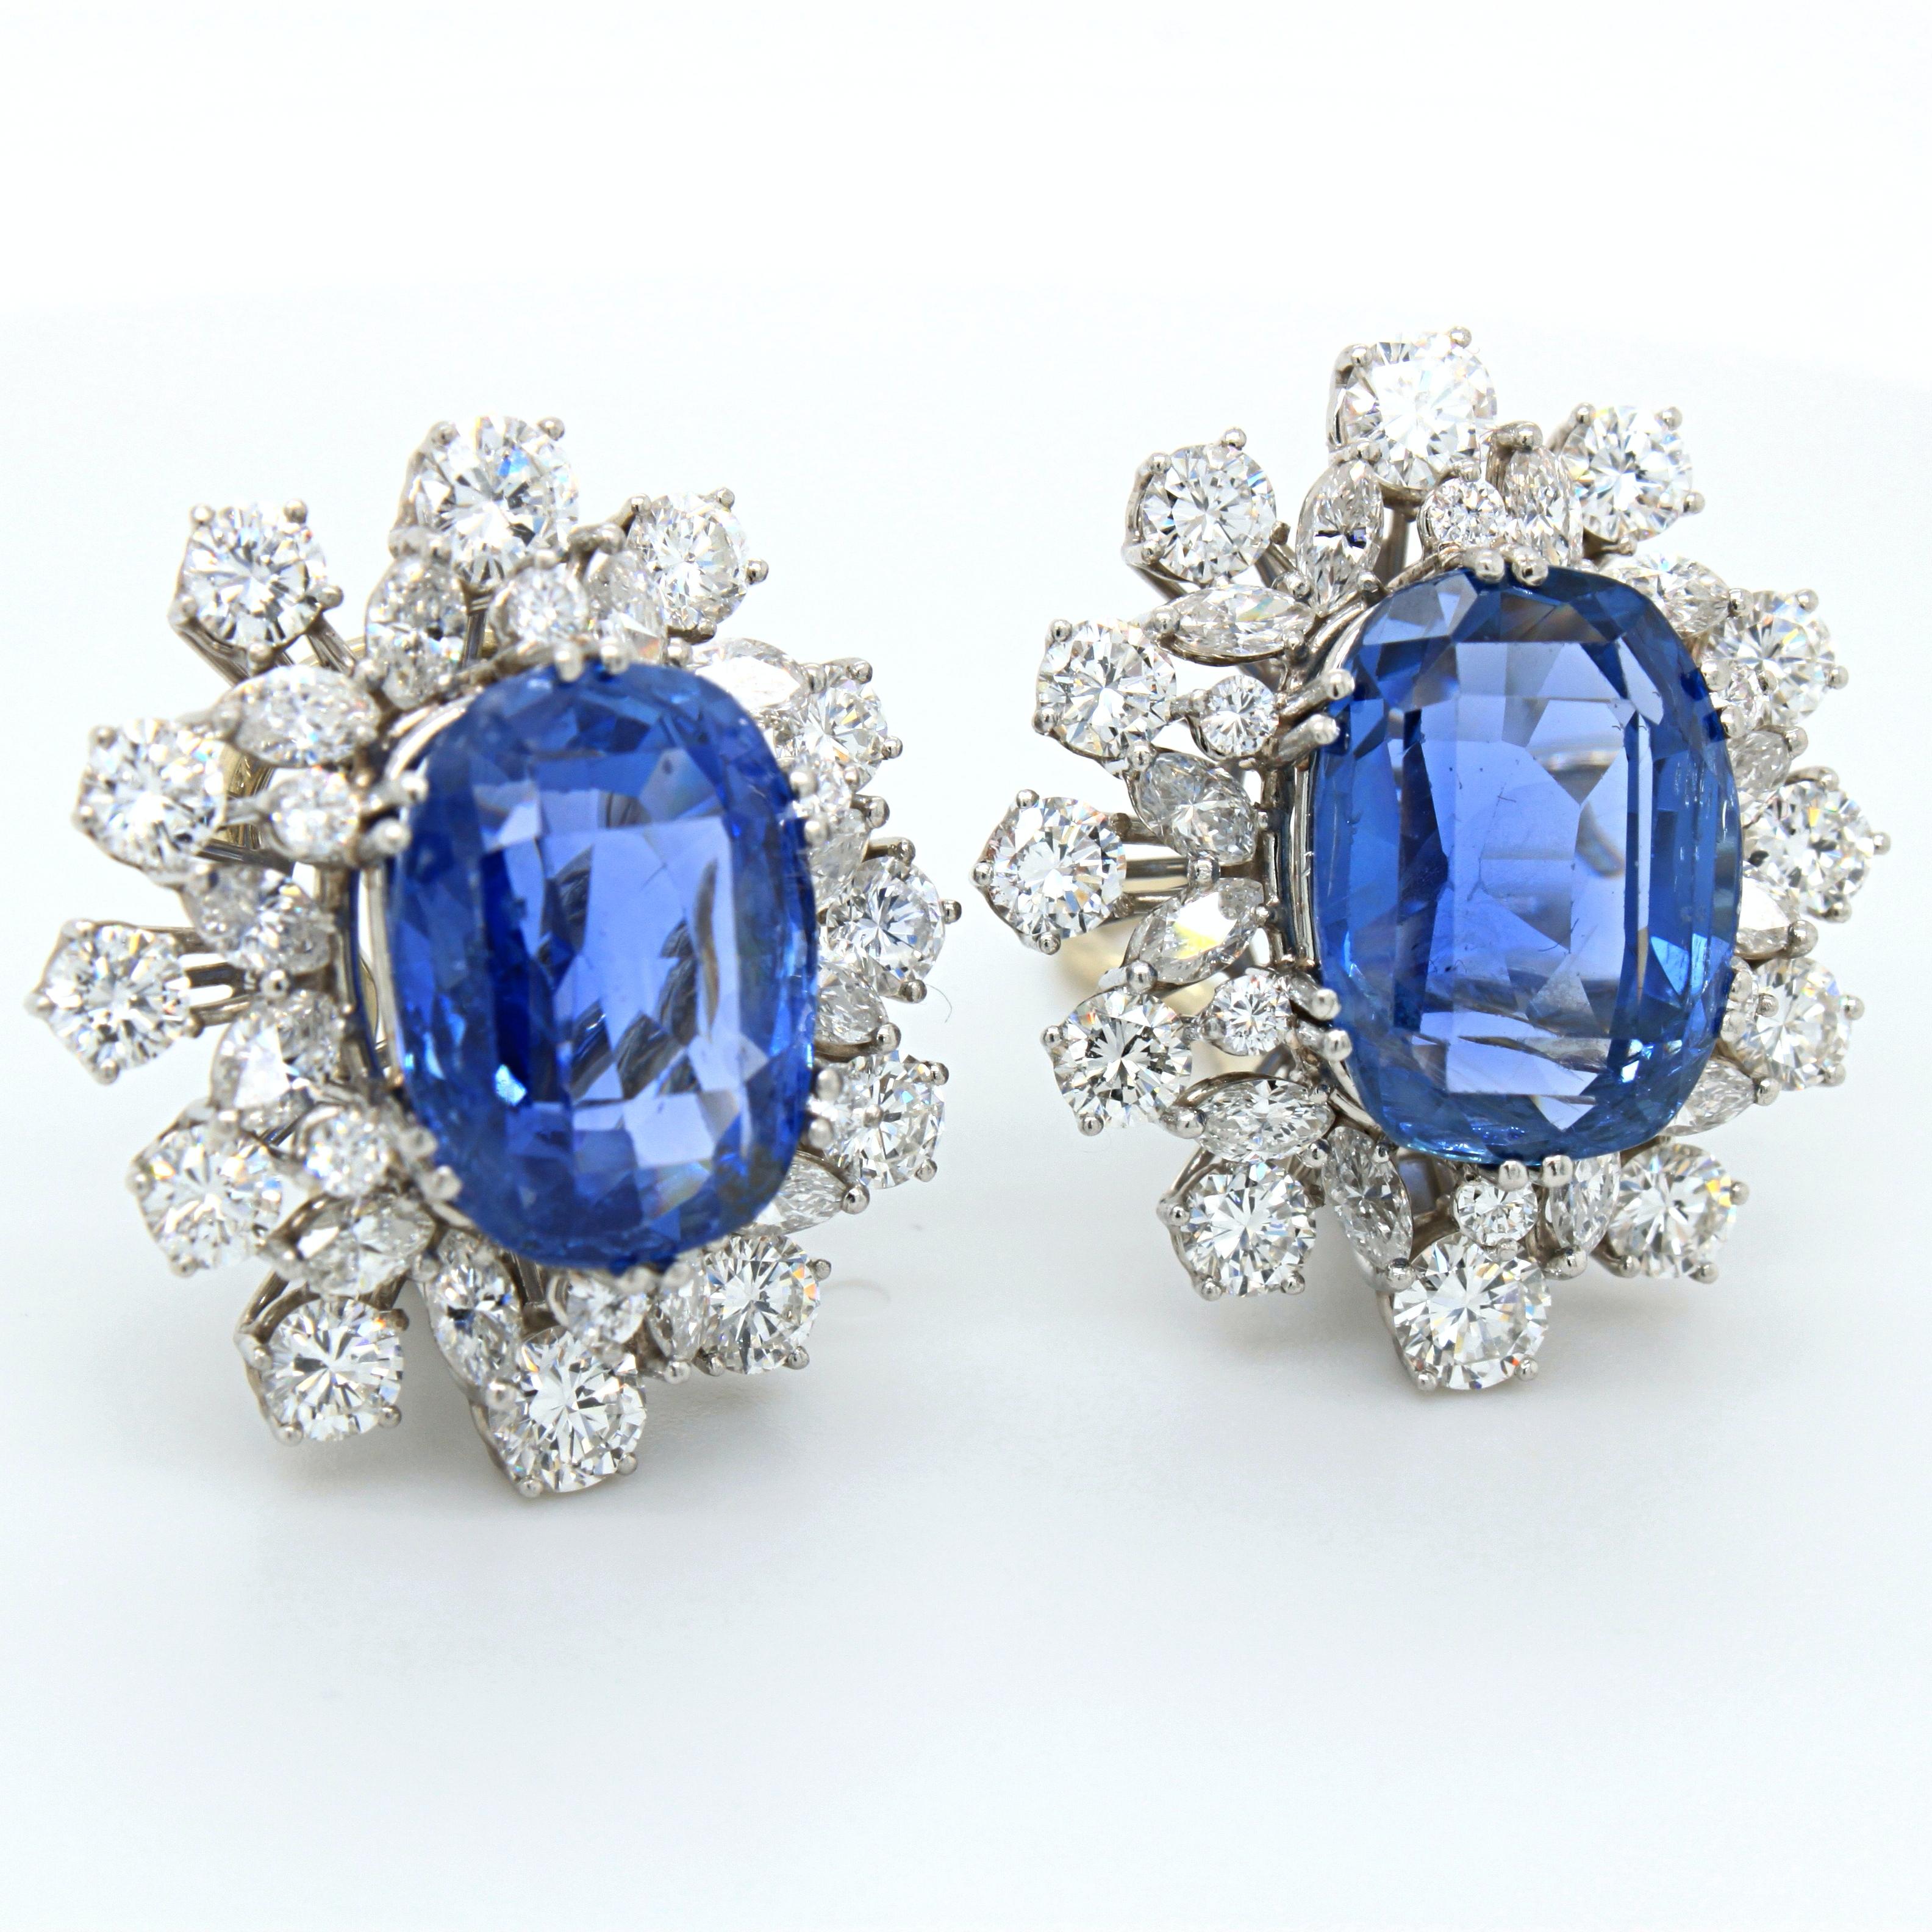 A pair of sapphire and diamond earrings in platinum, ca. 1970s. The cushion shaped sapphires are of Ceylon origin, natural and not heat treated, accompanied by a gemological certificate. They exhibit a classical Ceylon blue colour and have a